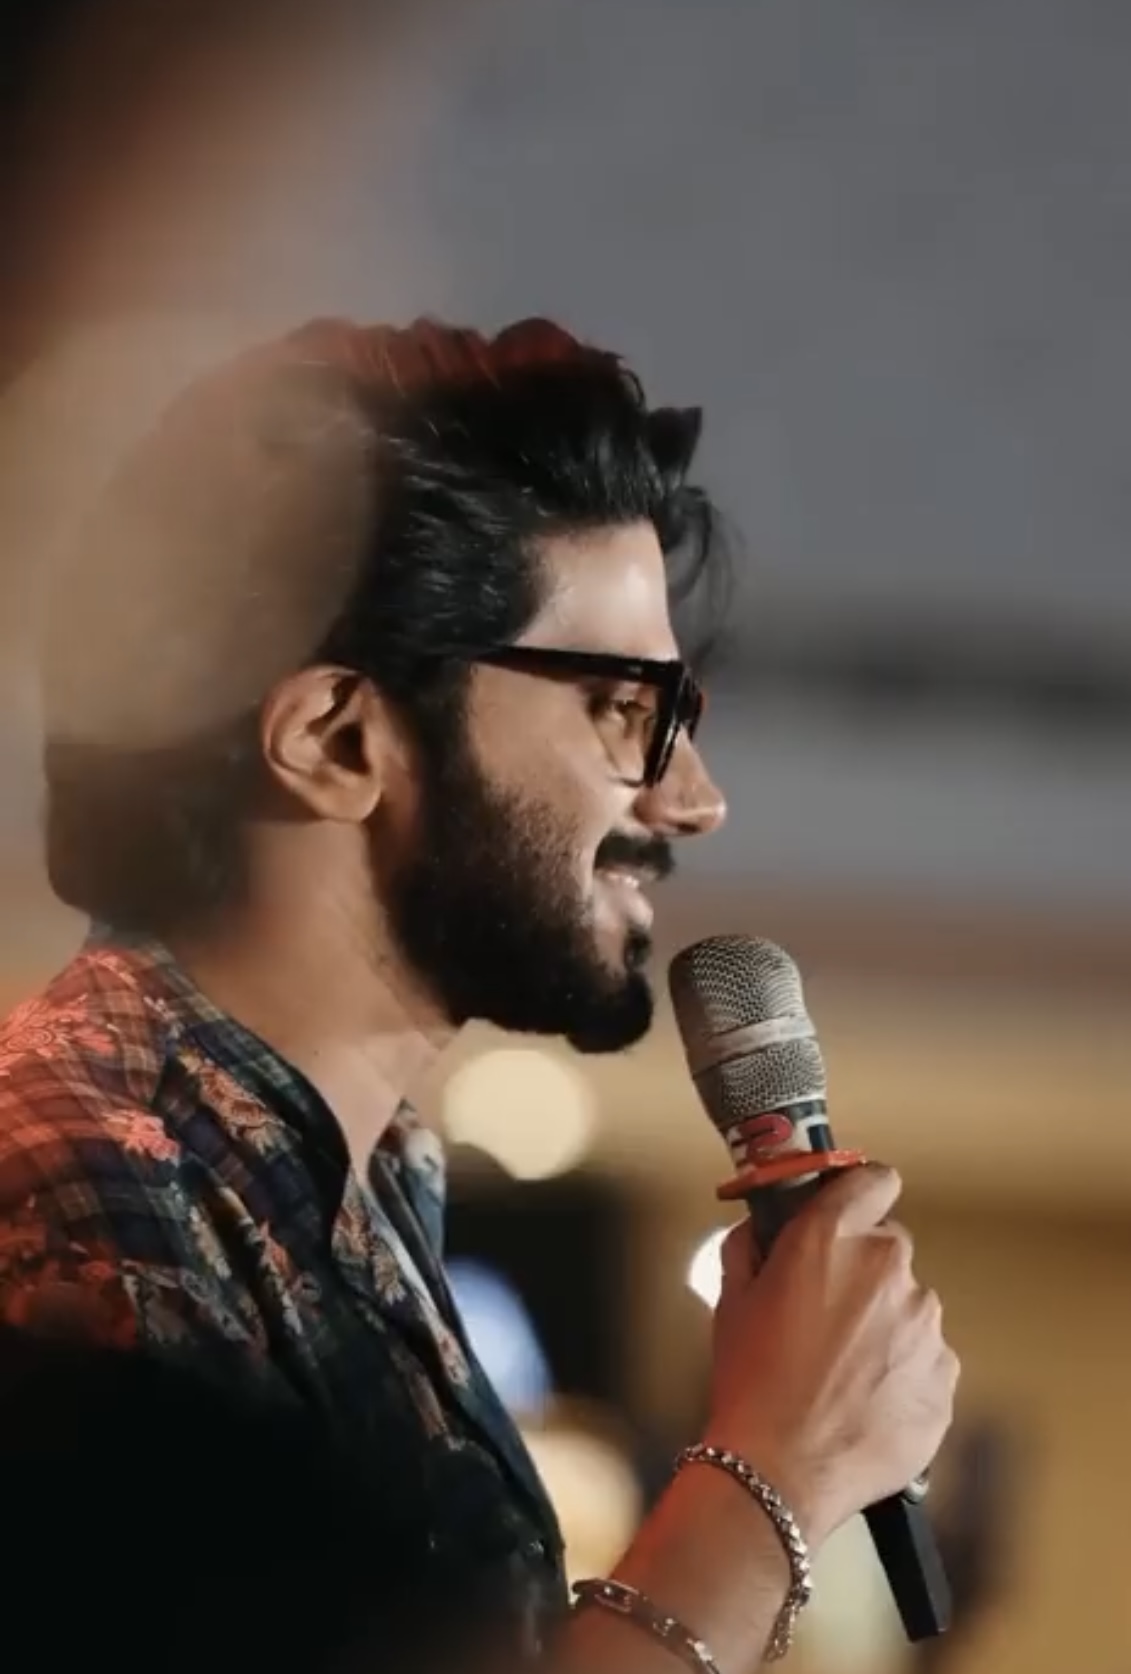 King Of Kotha Pre-release Event at Chennai | Dulquer Salmaan